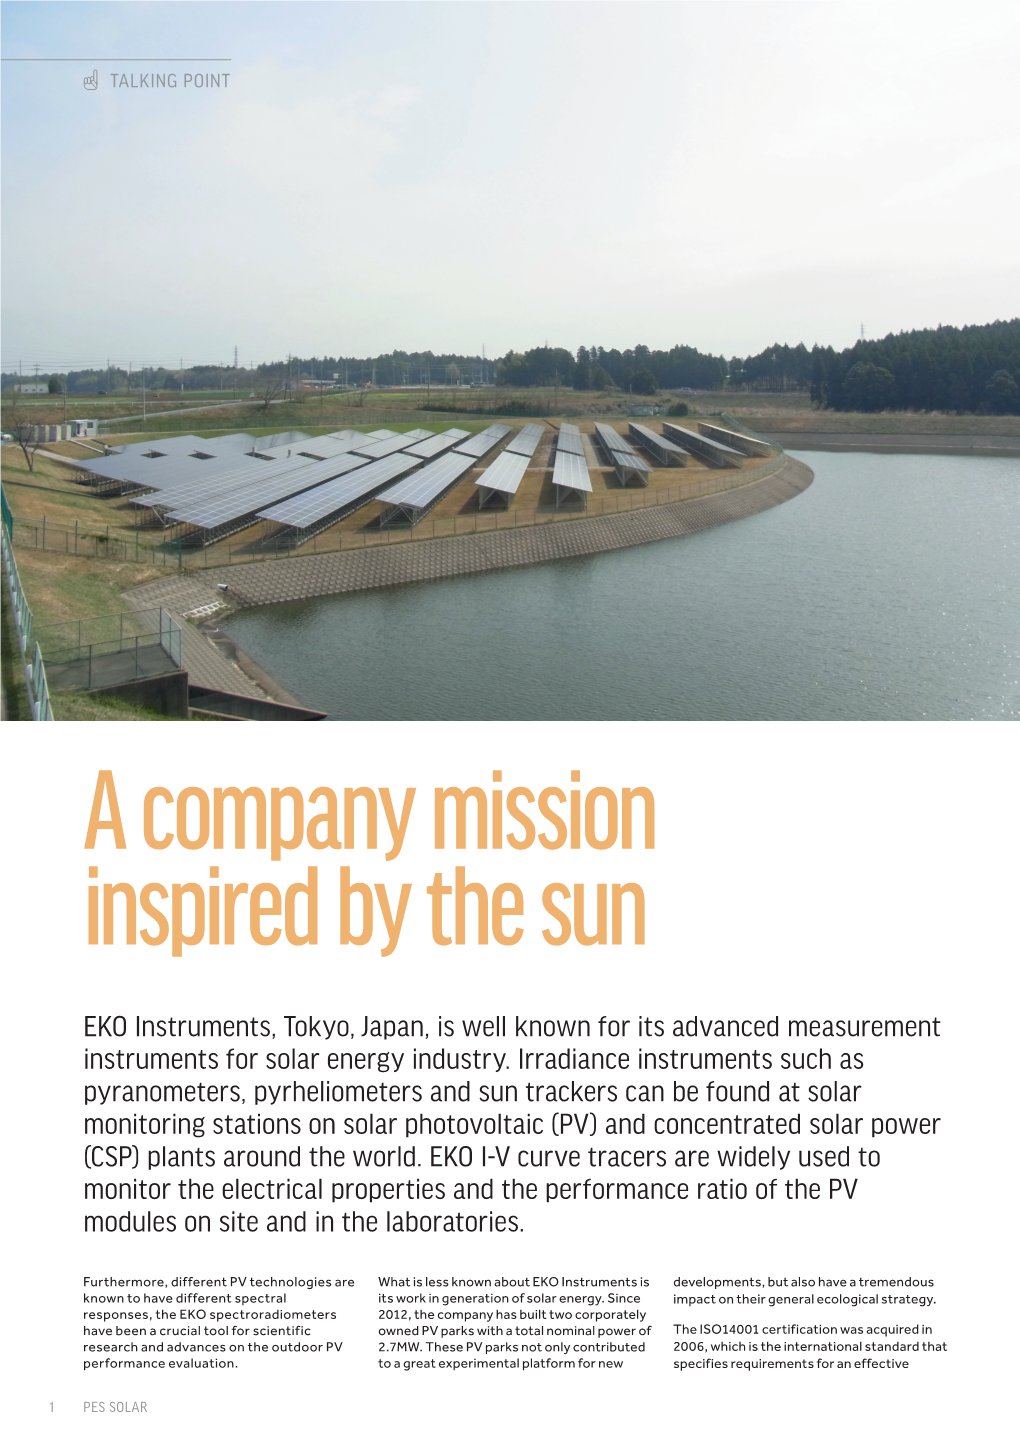 EKO Instruments, Tokyo, Japan, Is Well Known for Its Advanced Measurement Instruments for Solar Energy Industry